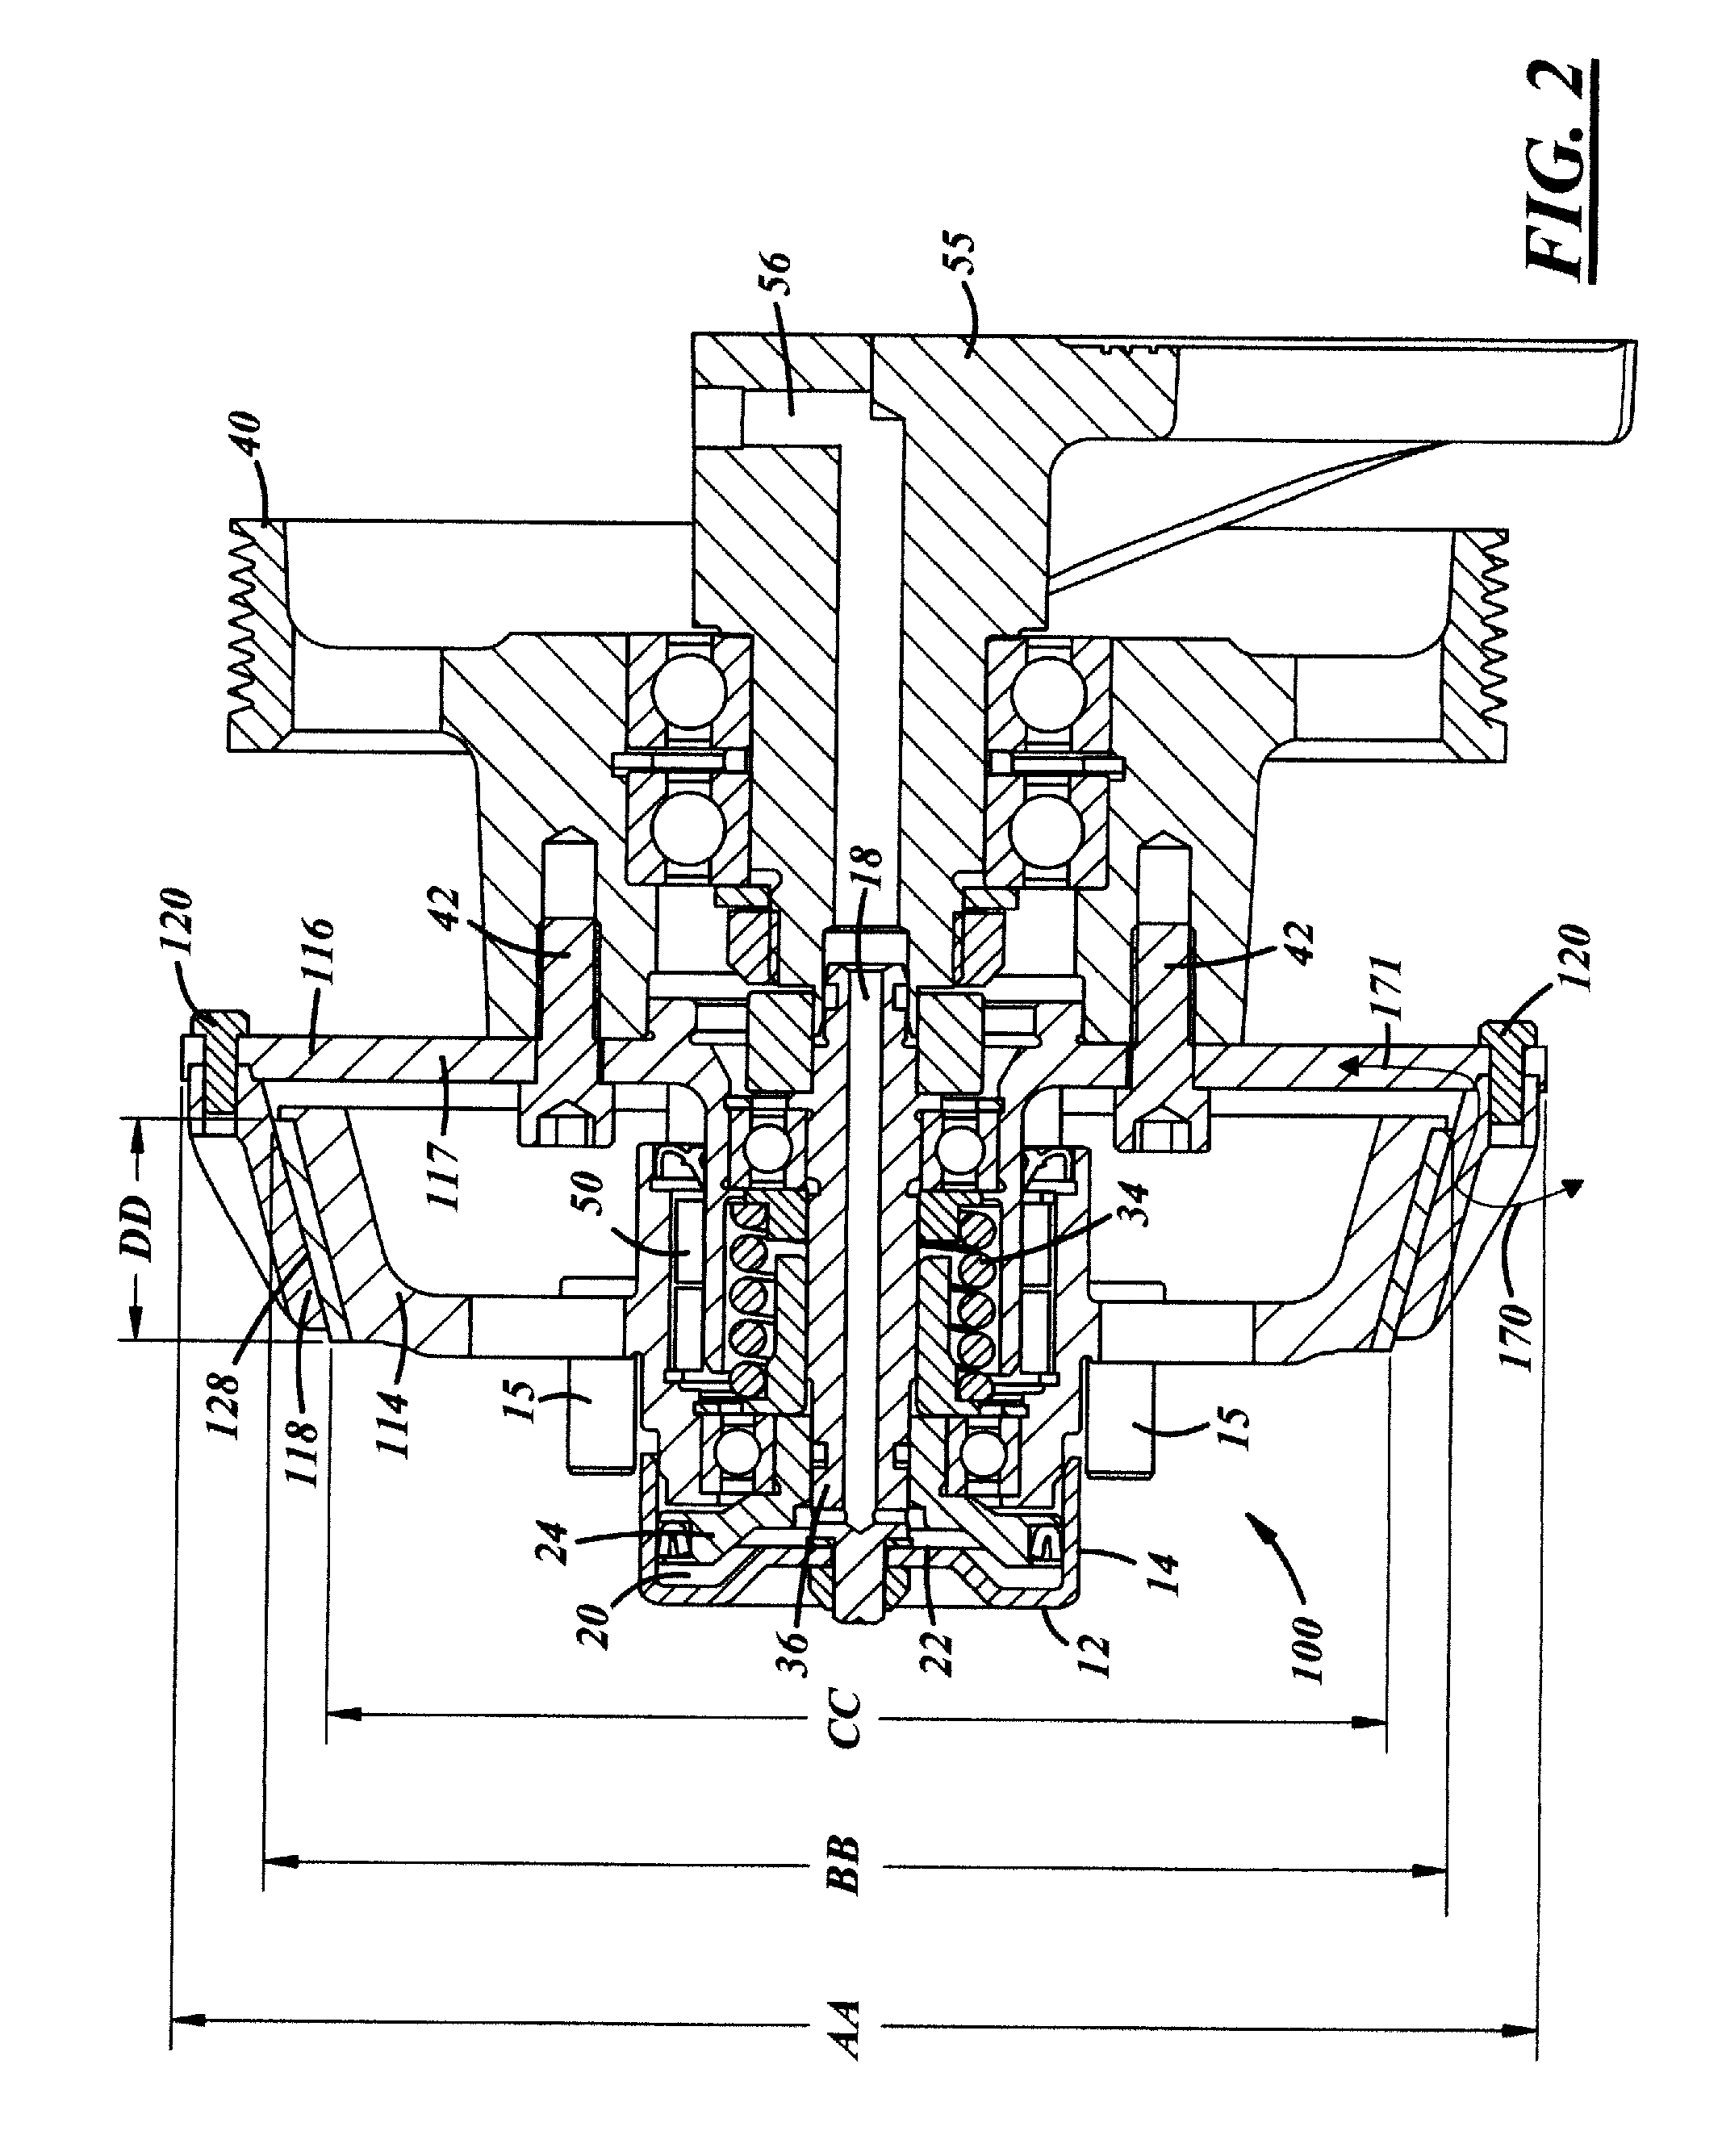 Pneumatic clutch with improved capacity and longevity